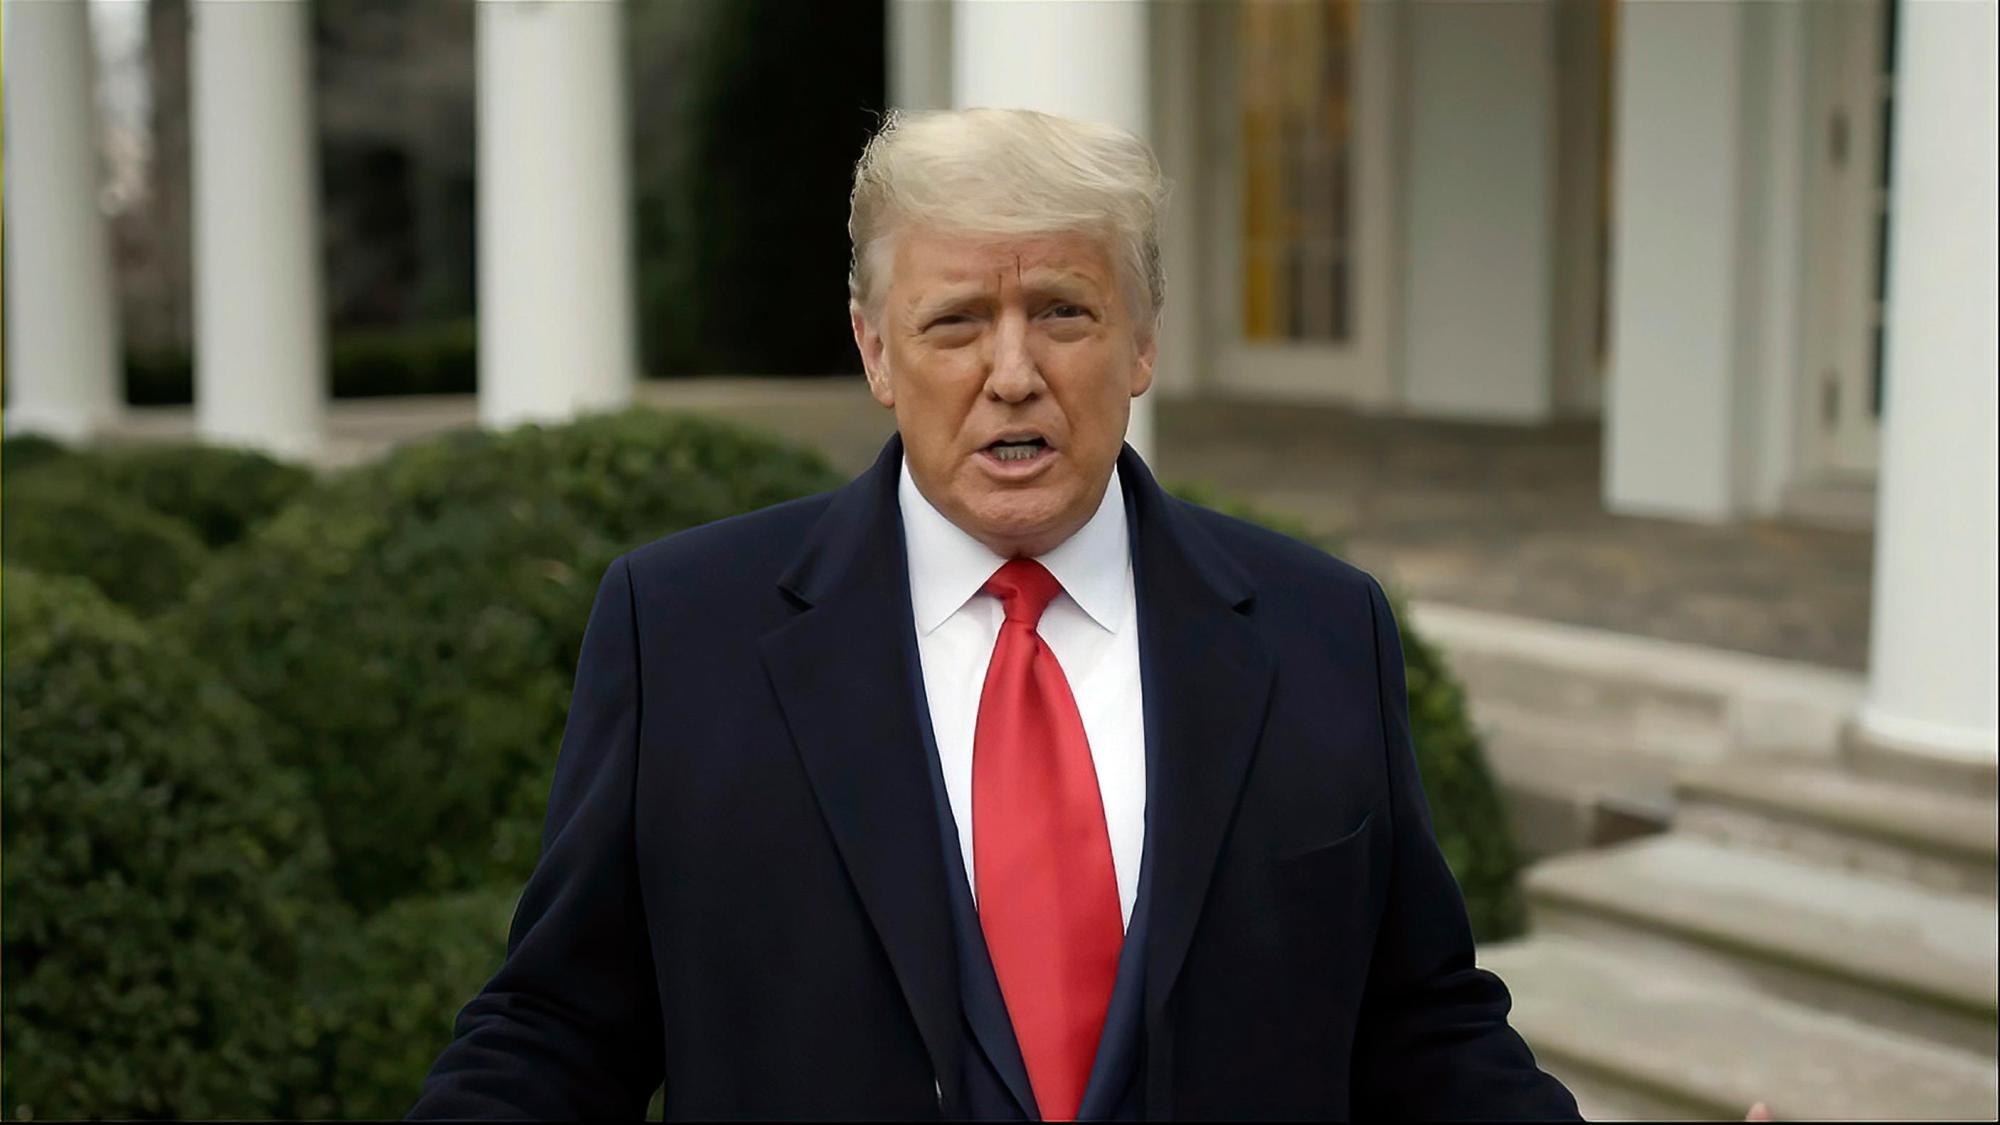 FILE - This exhibit from video released by the House Select Committee, shows President Donald Trump recording a video statement on the afternoon of Jan. 6, 2021, from the Rose Garden at the White House in Washington. Trump is making the Jan. 6, 2021 attack on the Capitol a cornerstone of his bid to return to the White House. Trump opened his first rally as the presumed Republican Party presidential nominee standing in salute with a recorded chorus of Jan. 6 prisoners singing the national anthem. (House Select Committee via AP)